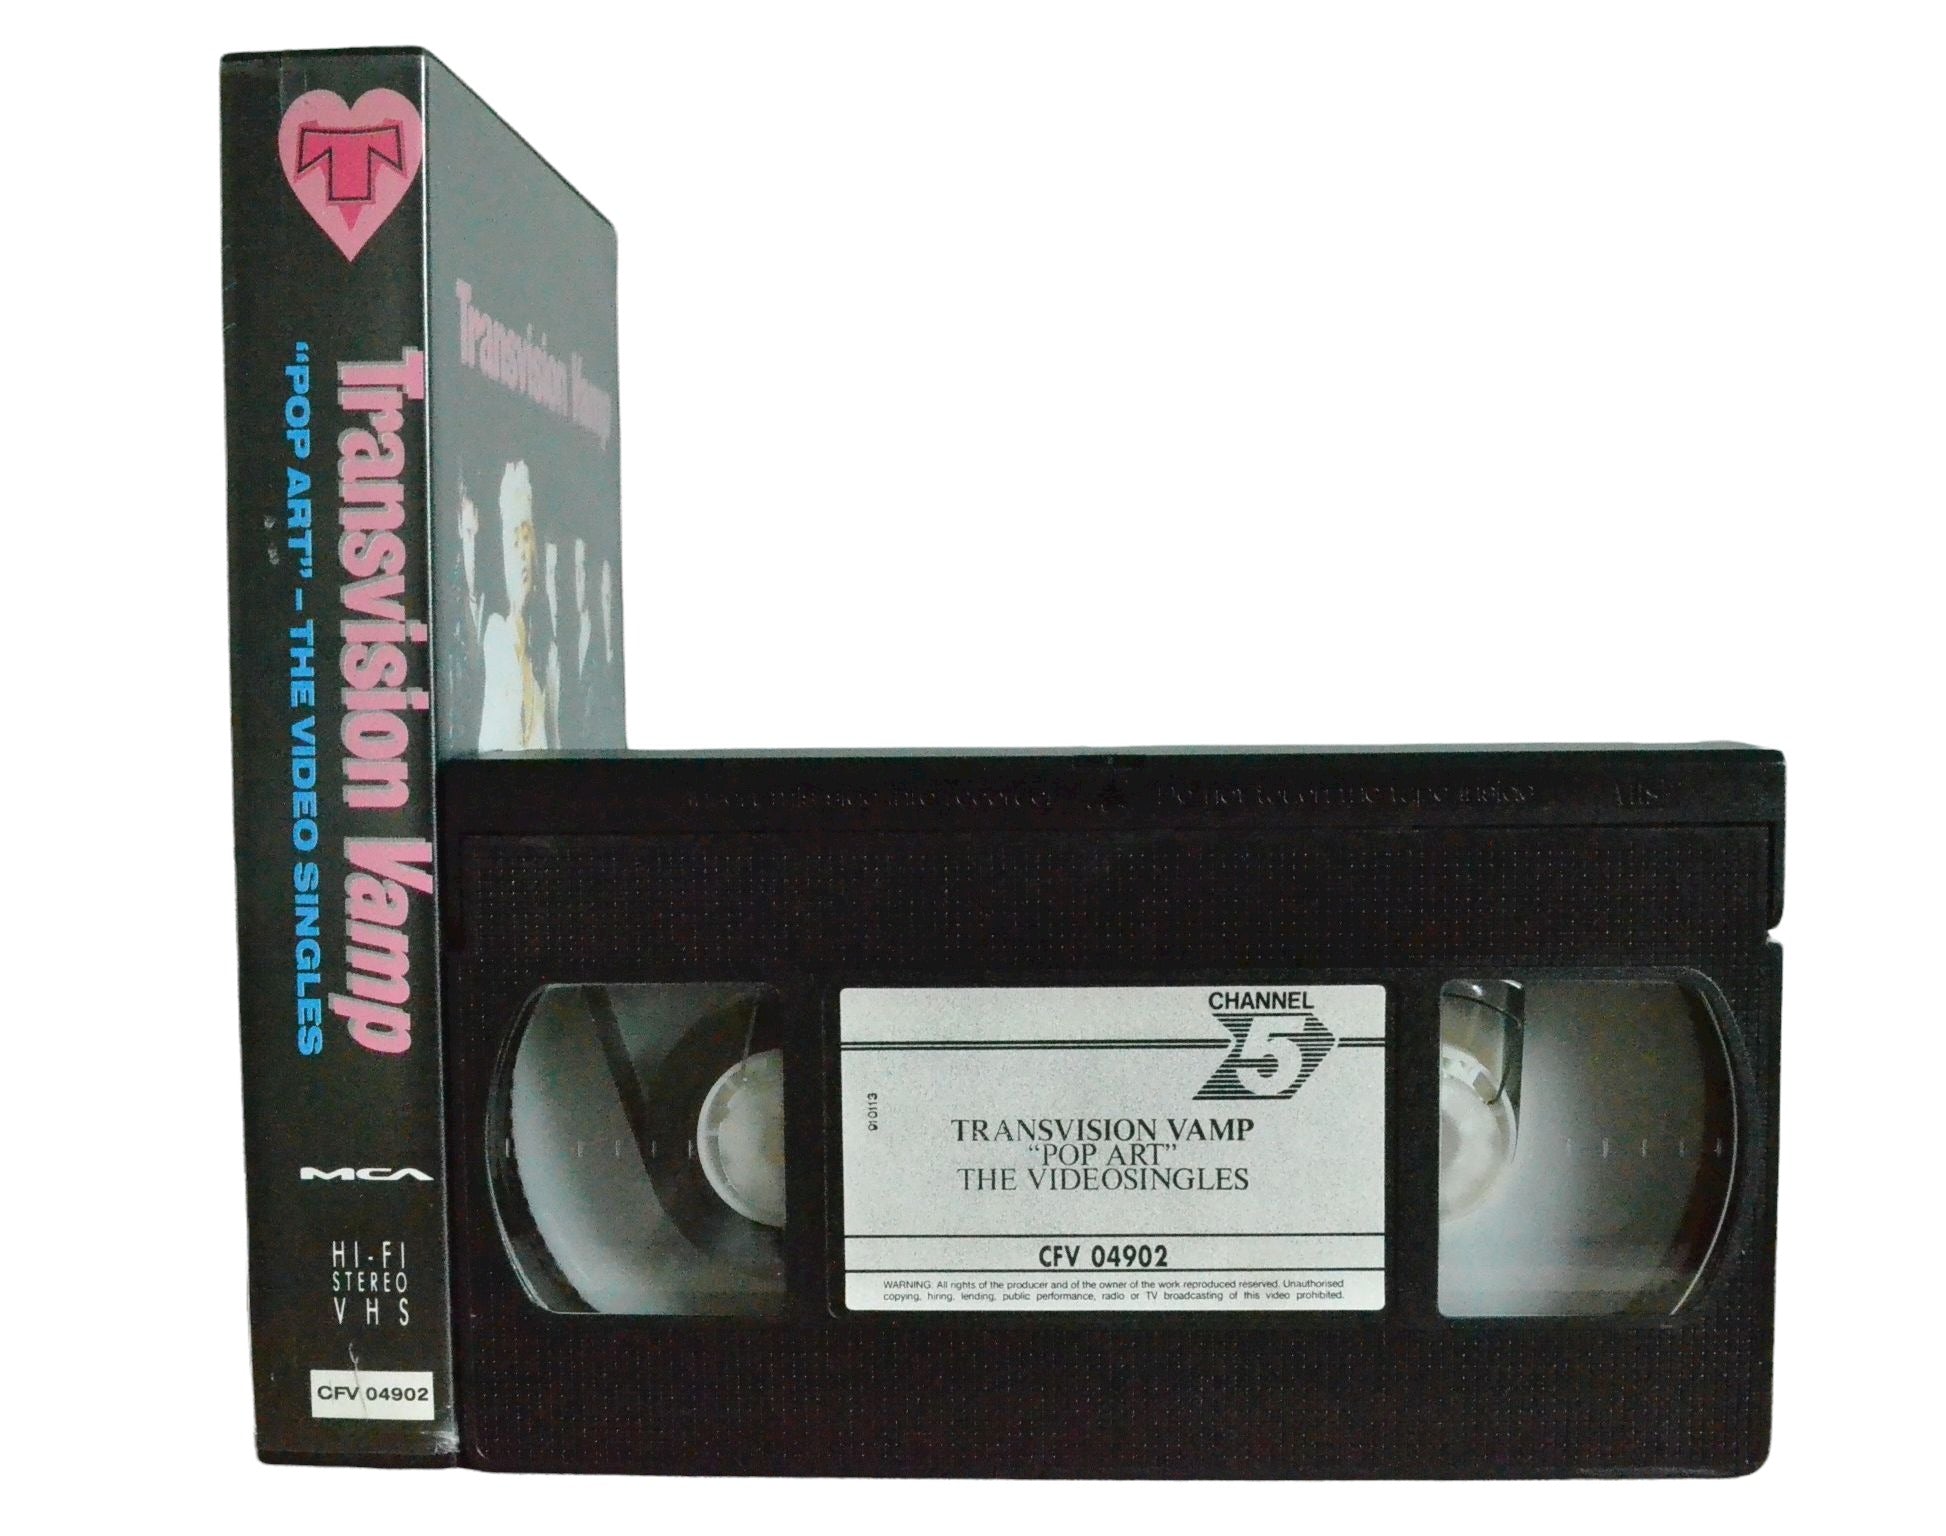 Transvision Vamp "Pop Art" The Video Singles - Wendy James - Channel 5 - Music - Pal VHS-